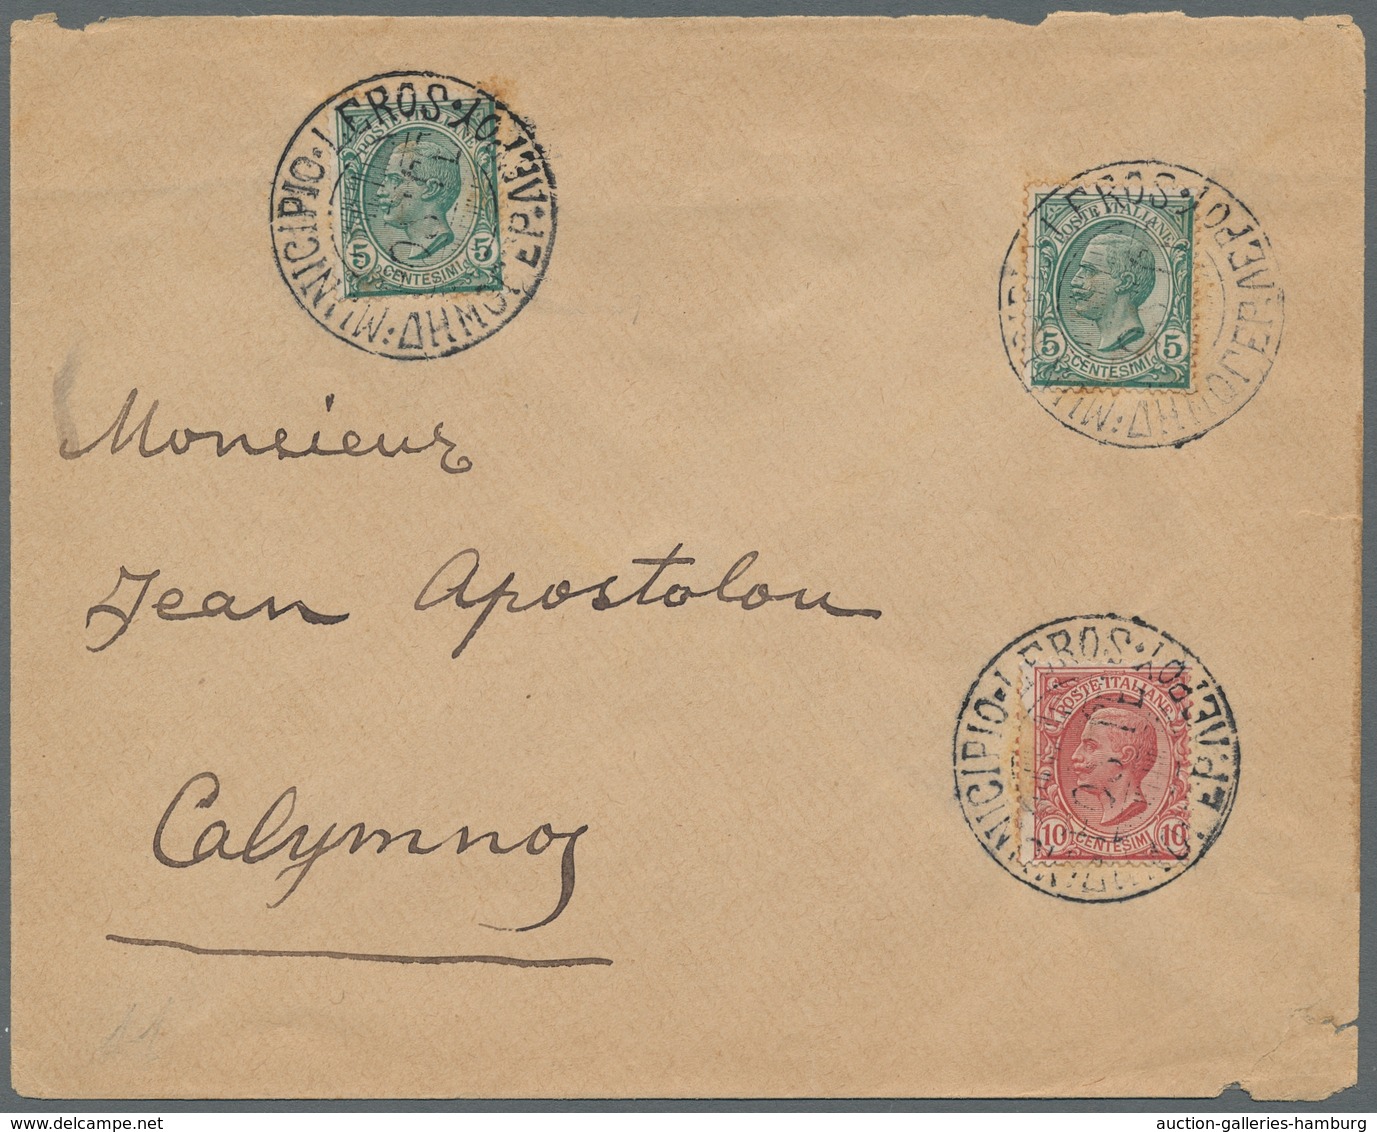 Ägäische Inseln: 1912, Italy Michel 88 (2) And 89 As Mixed Franking On Cover With Bilingual MUNCIPIO - Ägäis